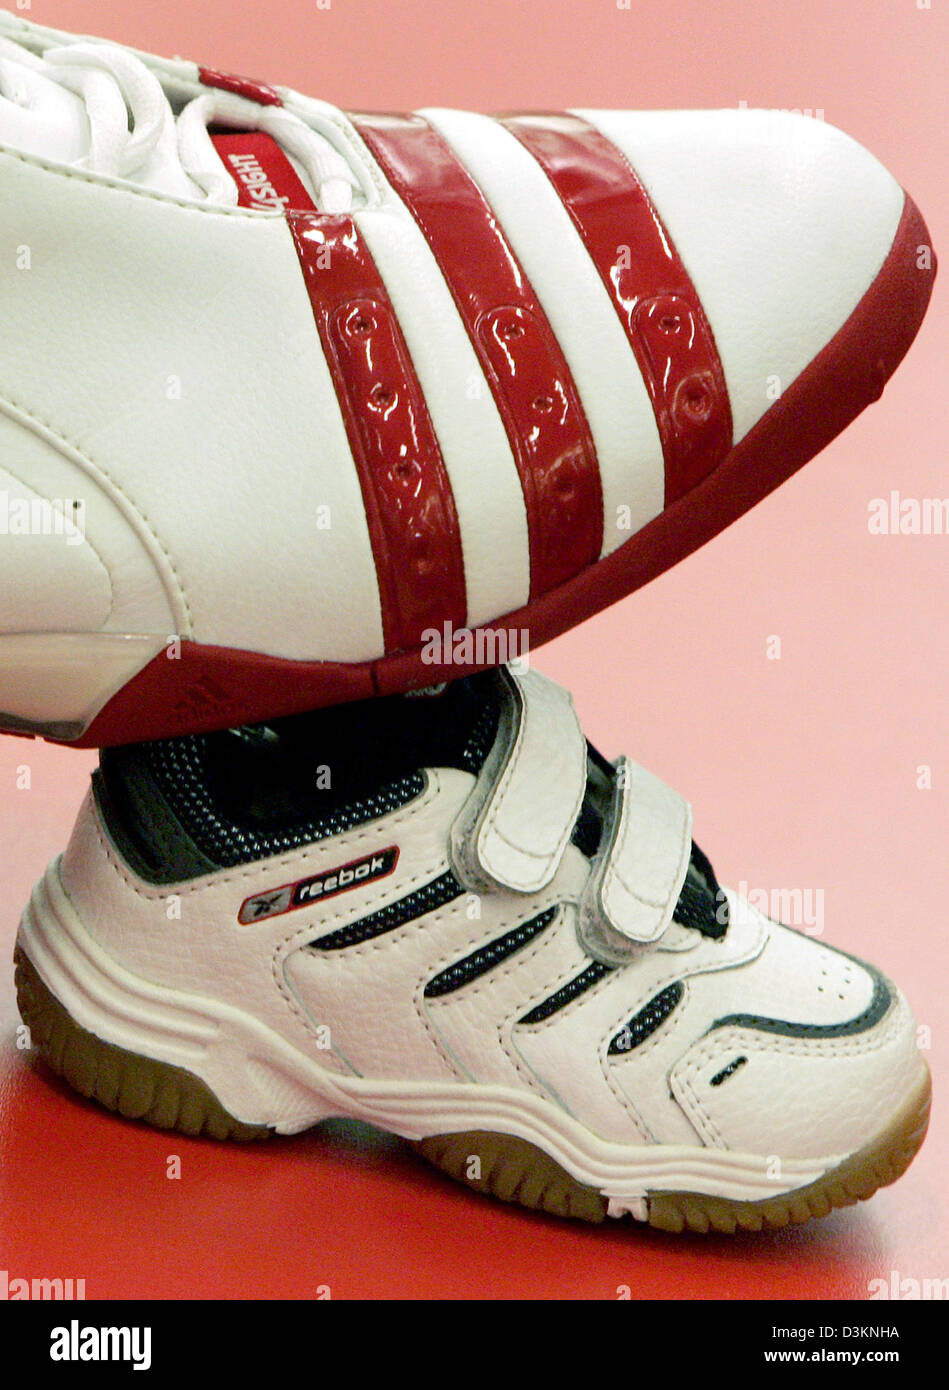 dpa) - The picture shows an Adidas basketball sneaker on top of a Reebok  baby sneaker in a sporting goods store in Frankfurt Main, Germany,  Wednesday 03 August 2005. In order to